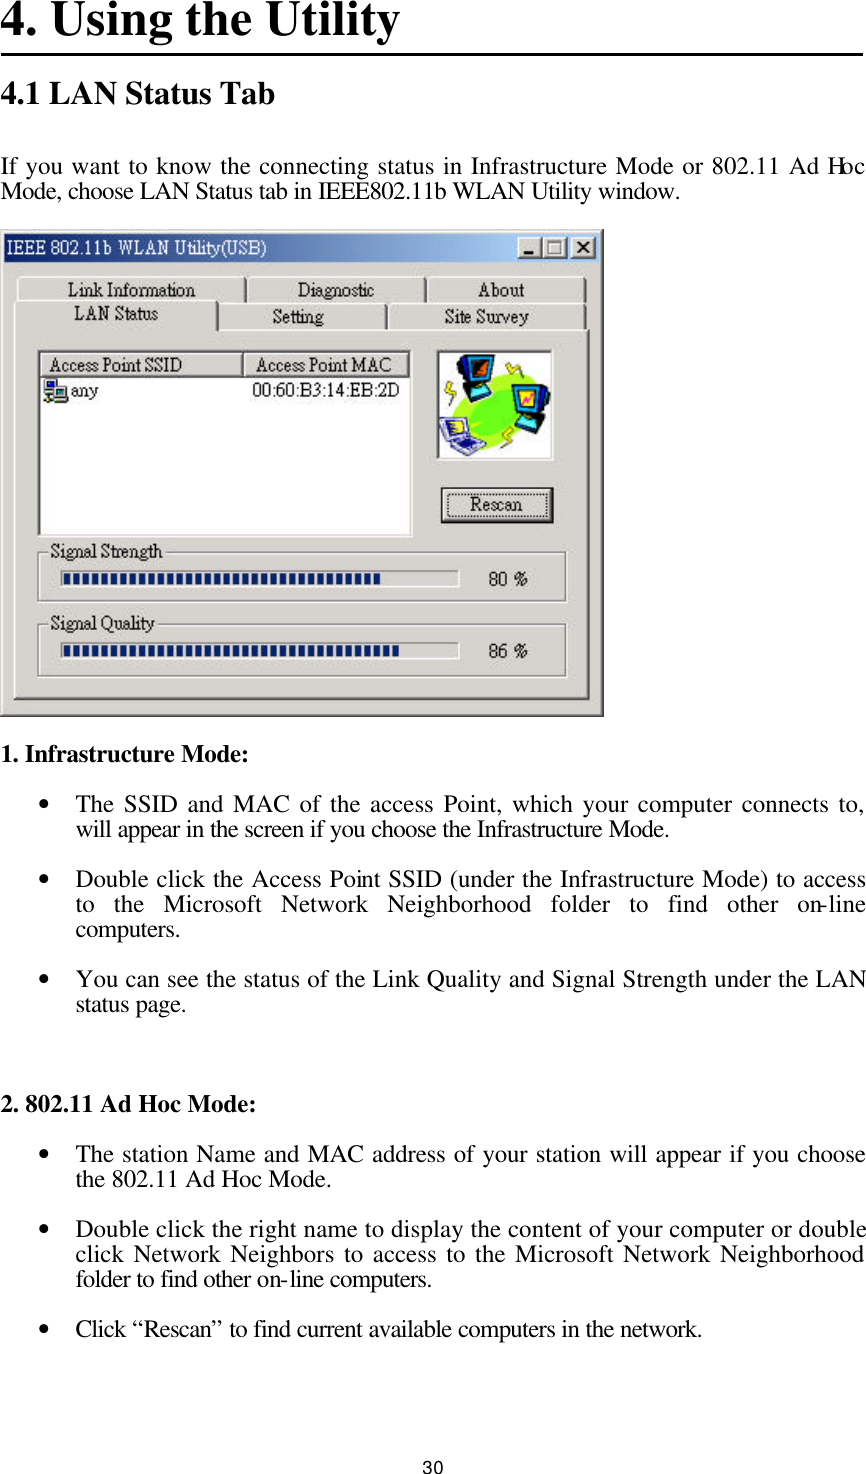  30 4. Using the Utility 4.1 LAN Status Tab If you want to know the connecting status in Infrastructure Mode or 802.11 Ad Hoc Mode, choose LAN Status tab in IEEE802.11b WLAN Utility window.  1. Infrastructure Mode: • The SSID and MAC of the access Point, which your computer connects to, will appear in the screen if you choose the Infrastructure Mode. • Double click the Access Point SSID (under the Infrastructure Mode) to access to the Microsoft Network Neighborhood folder to find other on-line computers. • You can see the status of the Link Quality and Signal Strength under the LAN status page.  2. 802.11 Ad Hoc Mode: • The station Name and MAC address of your station will appear if you choose the 802.11 Ad Hoc Mode. • Double click the right name to display the content of your computer or double click Network Neighbors to access to the Microsoft Network Neighborhood folder to find other on-line computers. • Click “Rescan” to find current available computers in the network. 